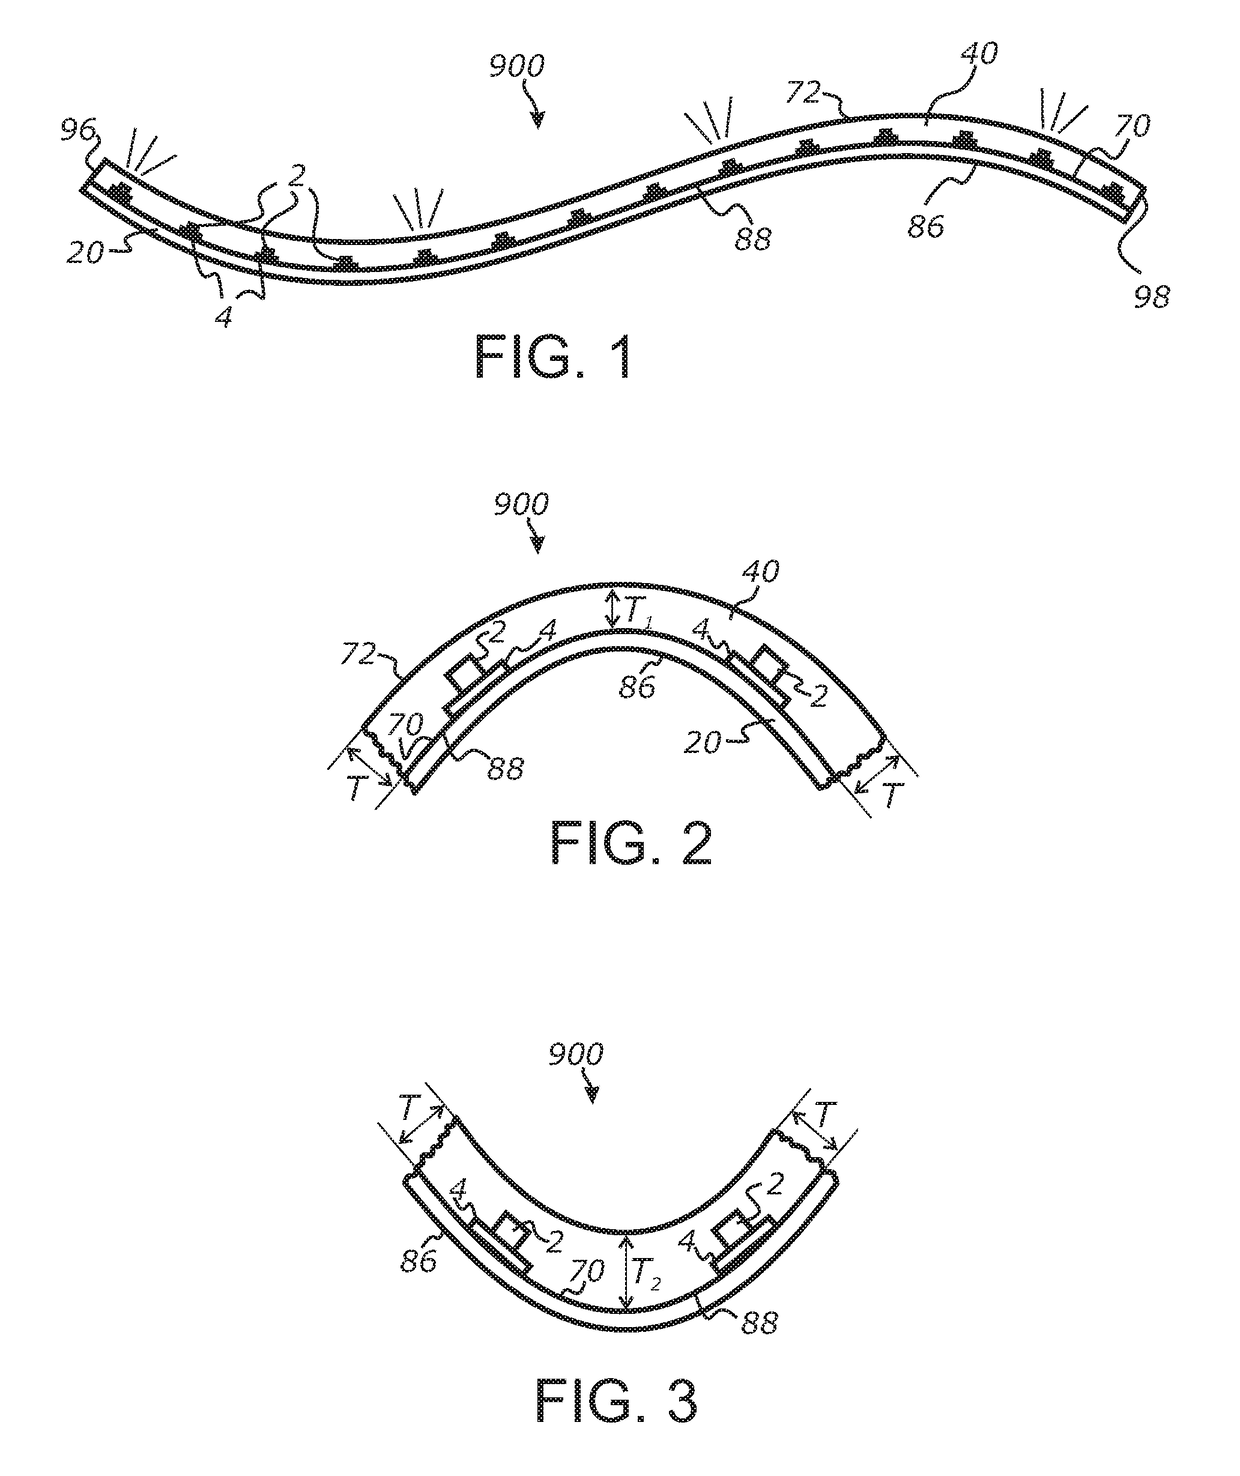 Flexible solid-state illumination devices